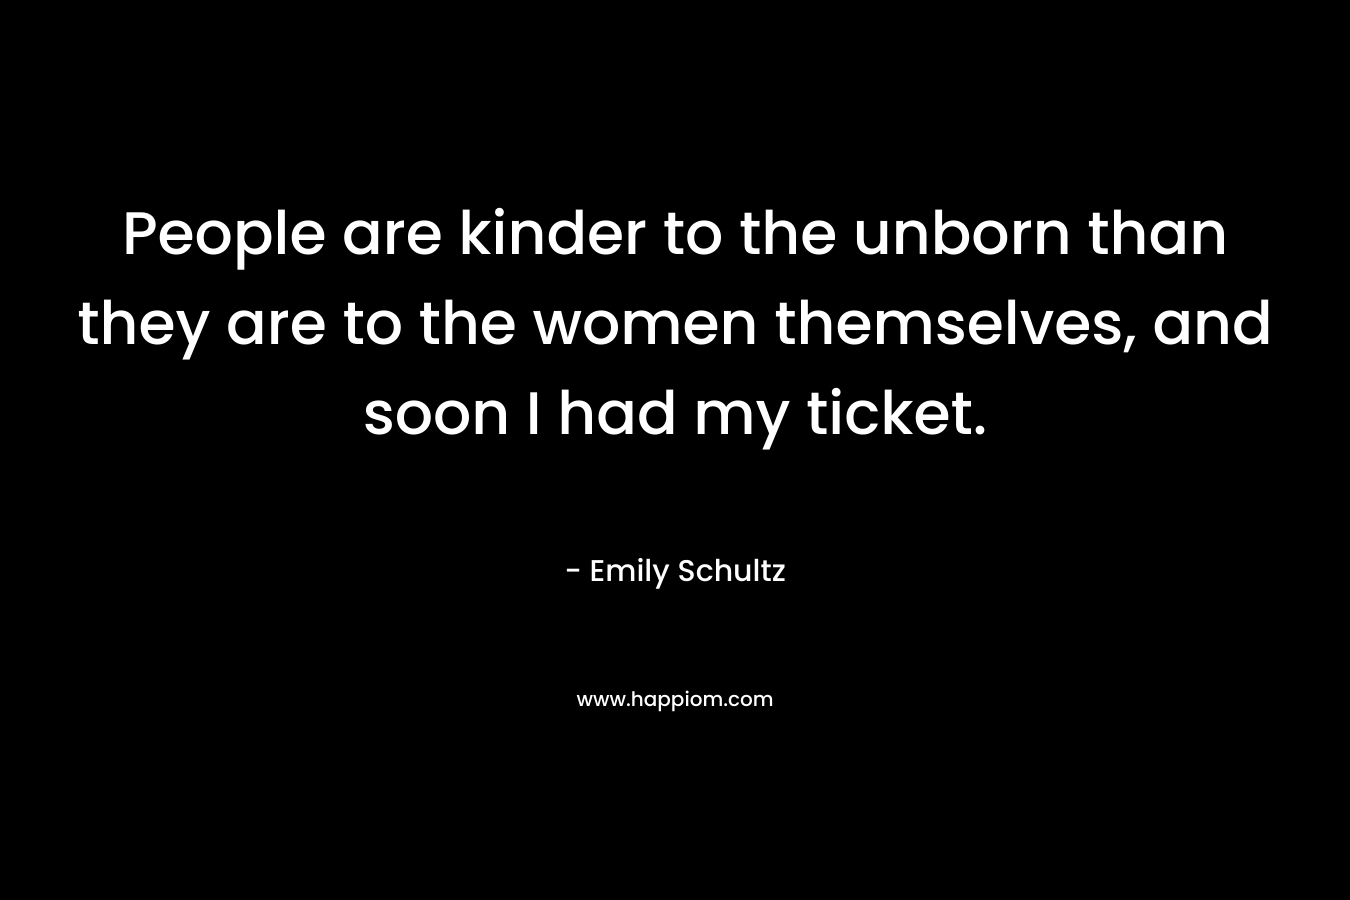 People are kinder to the unborn than they are to the women themselves, and soon I had my ticket. – Emily Schultz